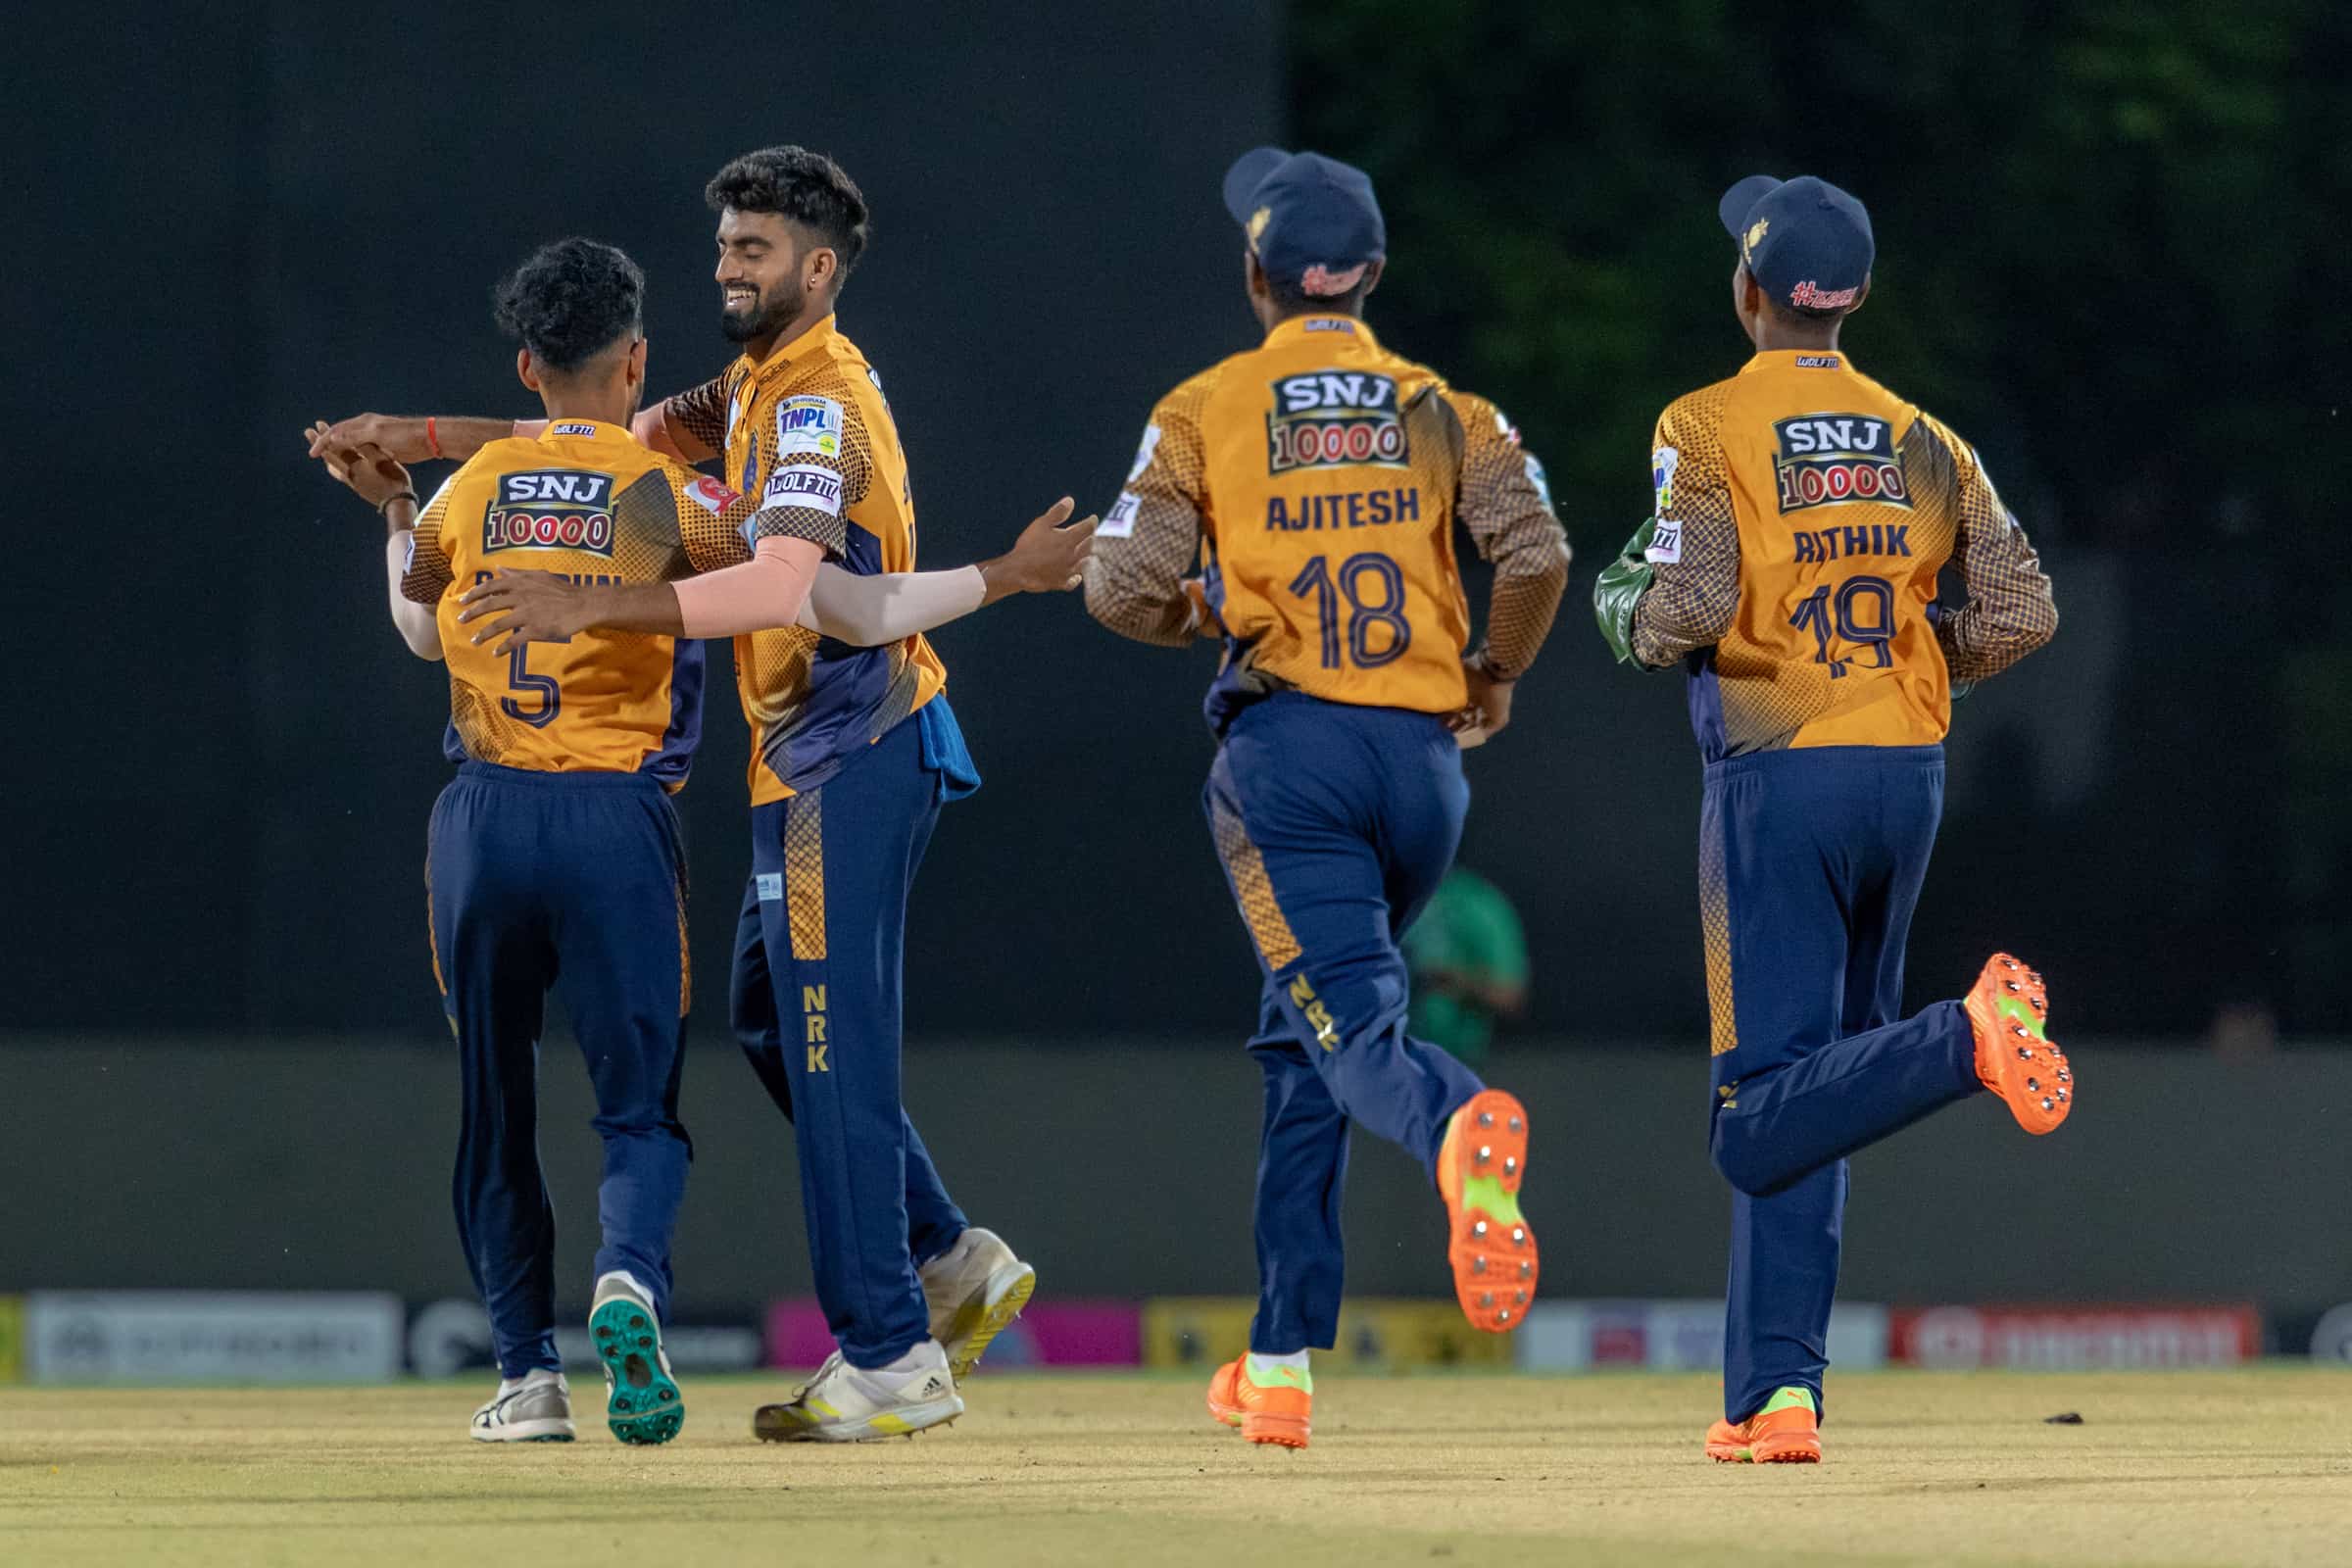 TNPL 2023: BT vs NRK: Match Preview, Pitch Report, Predicted XIs, Fantasy Tips, & Prediction